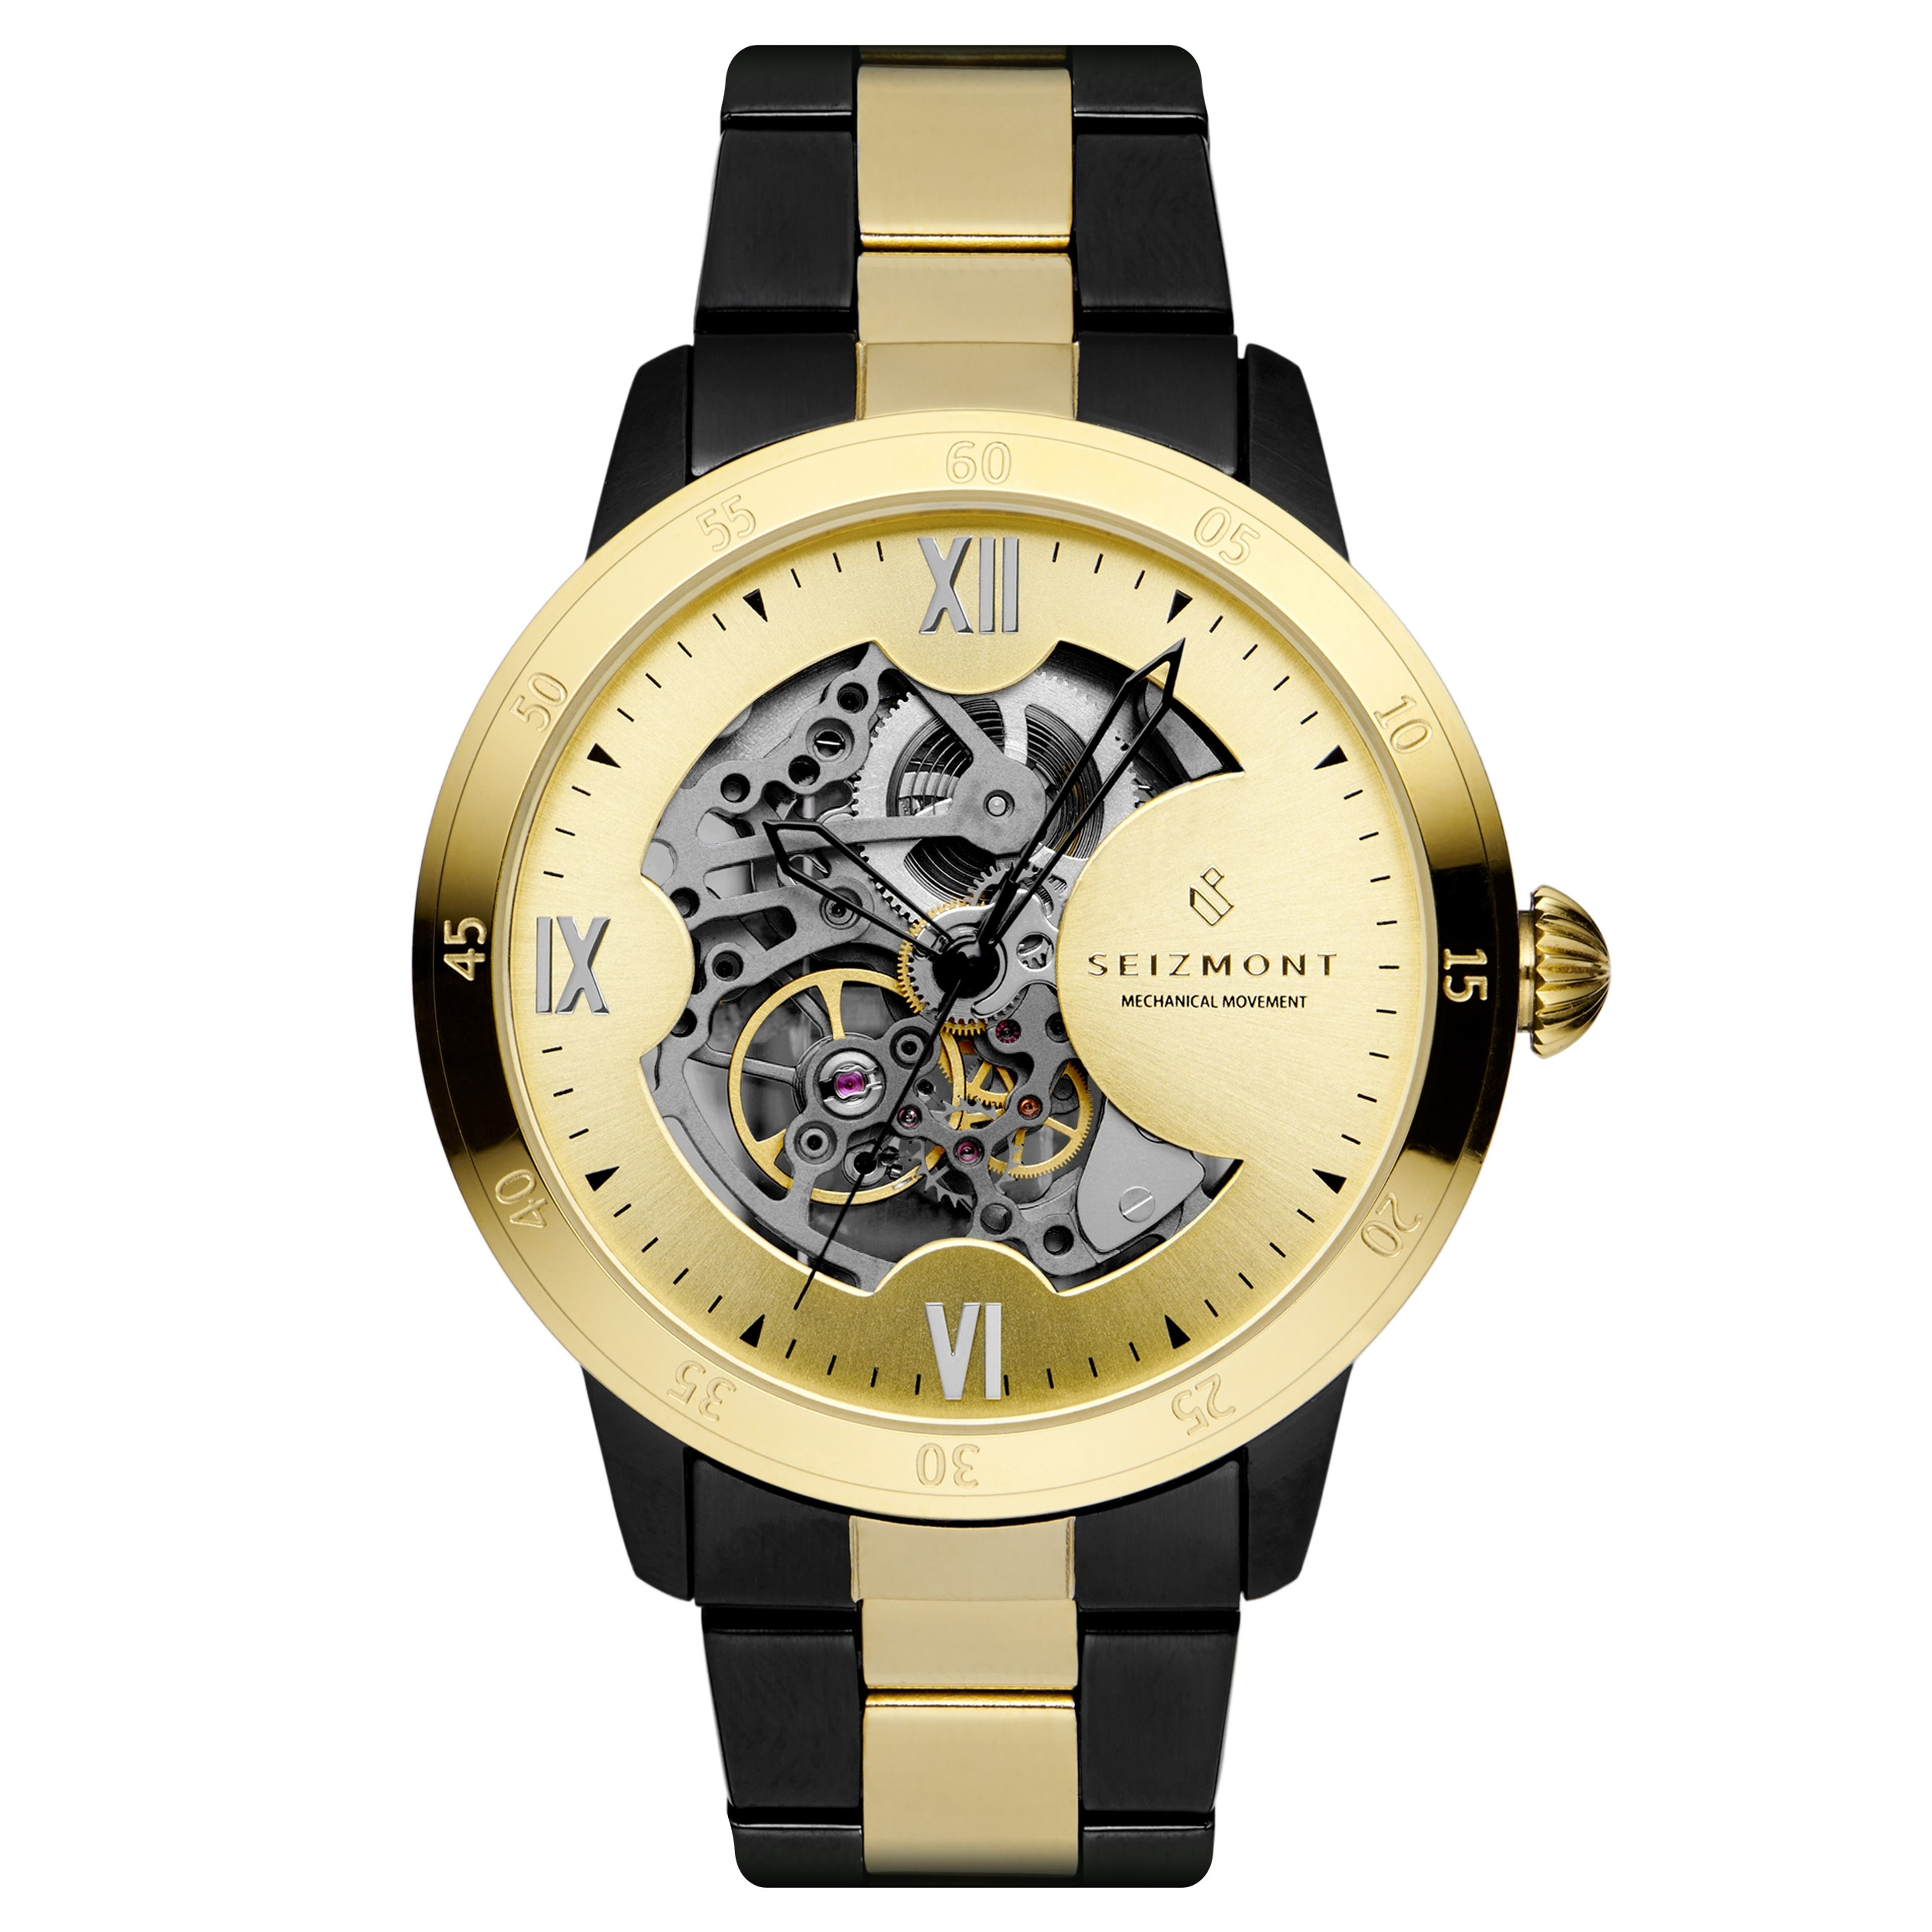 Dante | Gold-Tone & Black Stainless Steel Skeleton Watch With Gold-Tone Dial